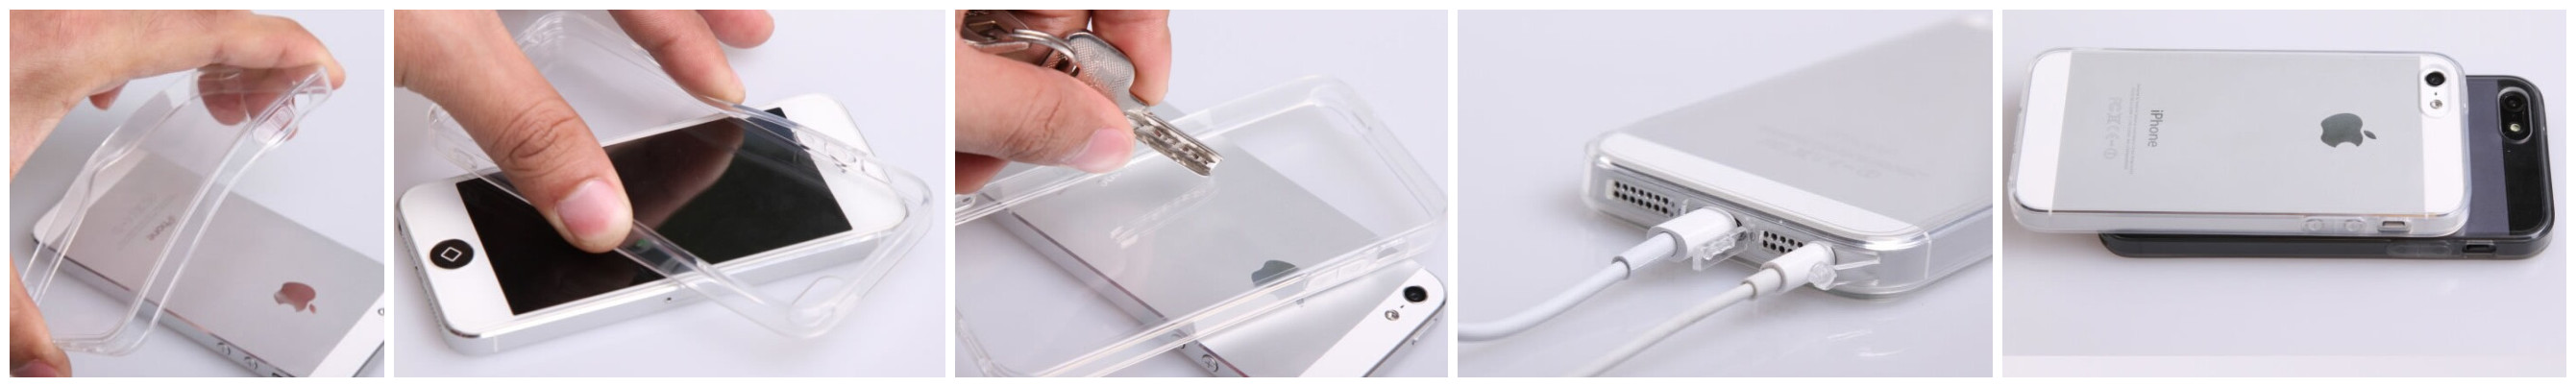 phone accessories quality inspection